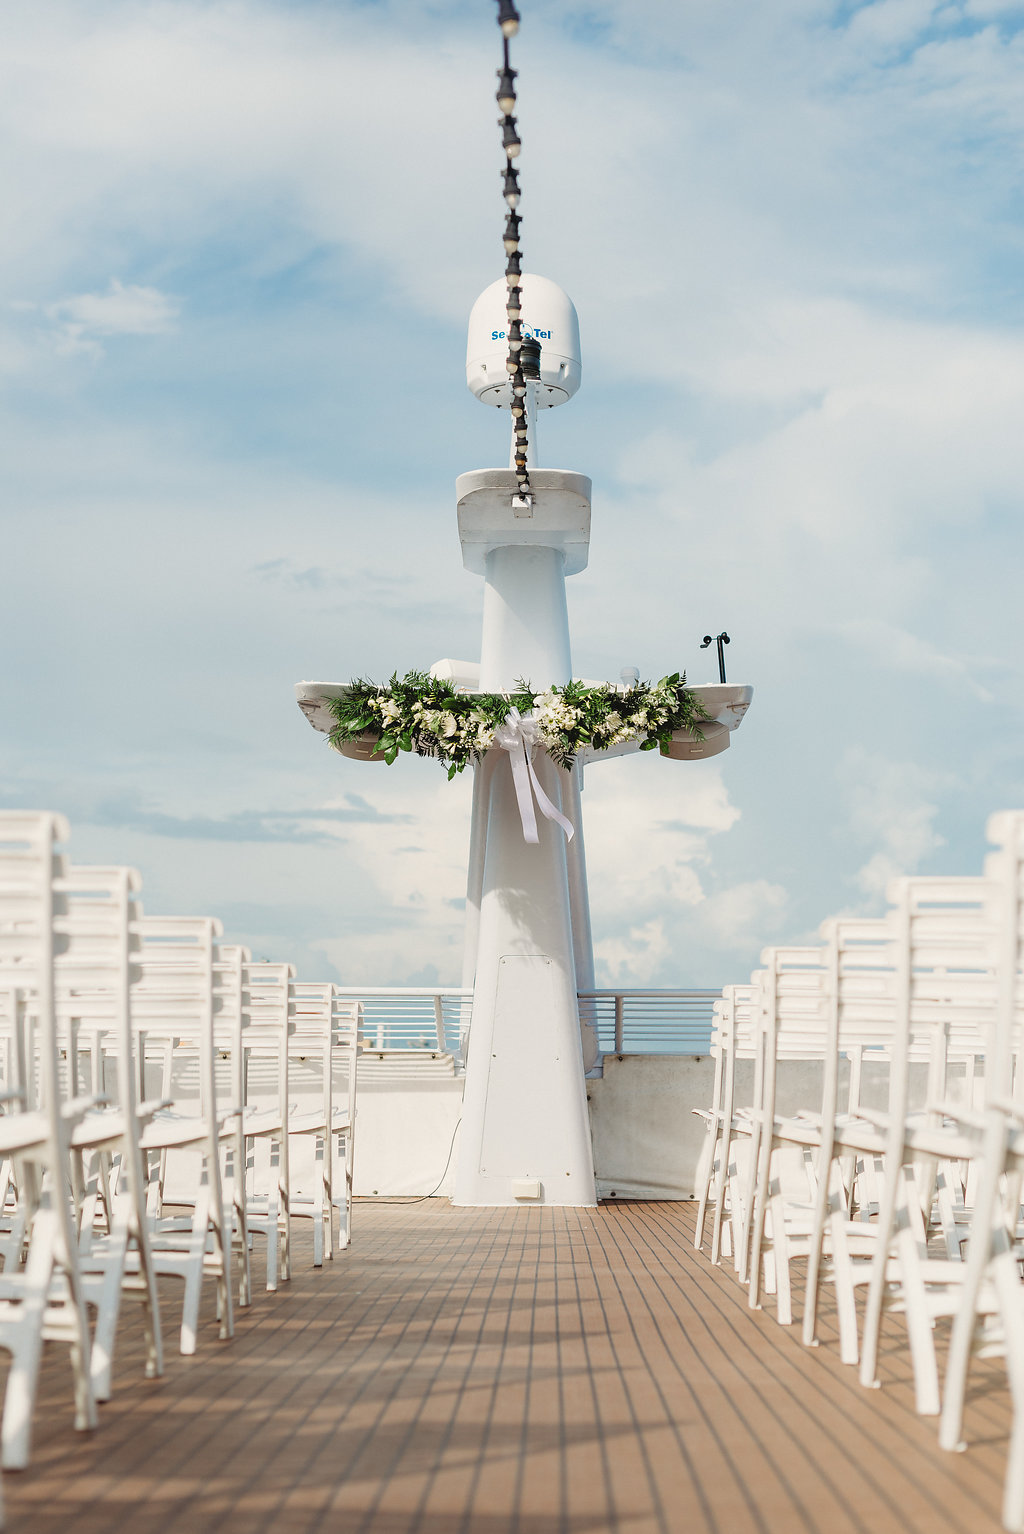 Tampa Outdoor Waterfront Wedding Ceremony Decor, Greenery and White Florals | Tampa Waterfront Wedding Venue Yacht Starship IV